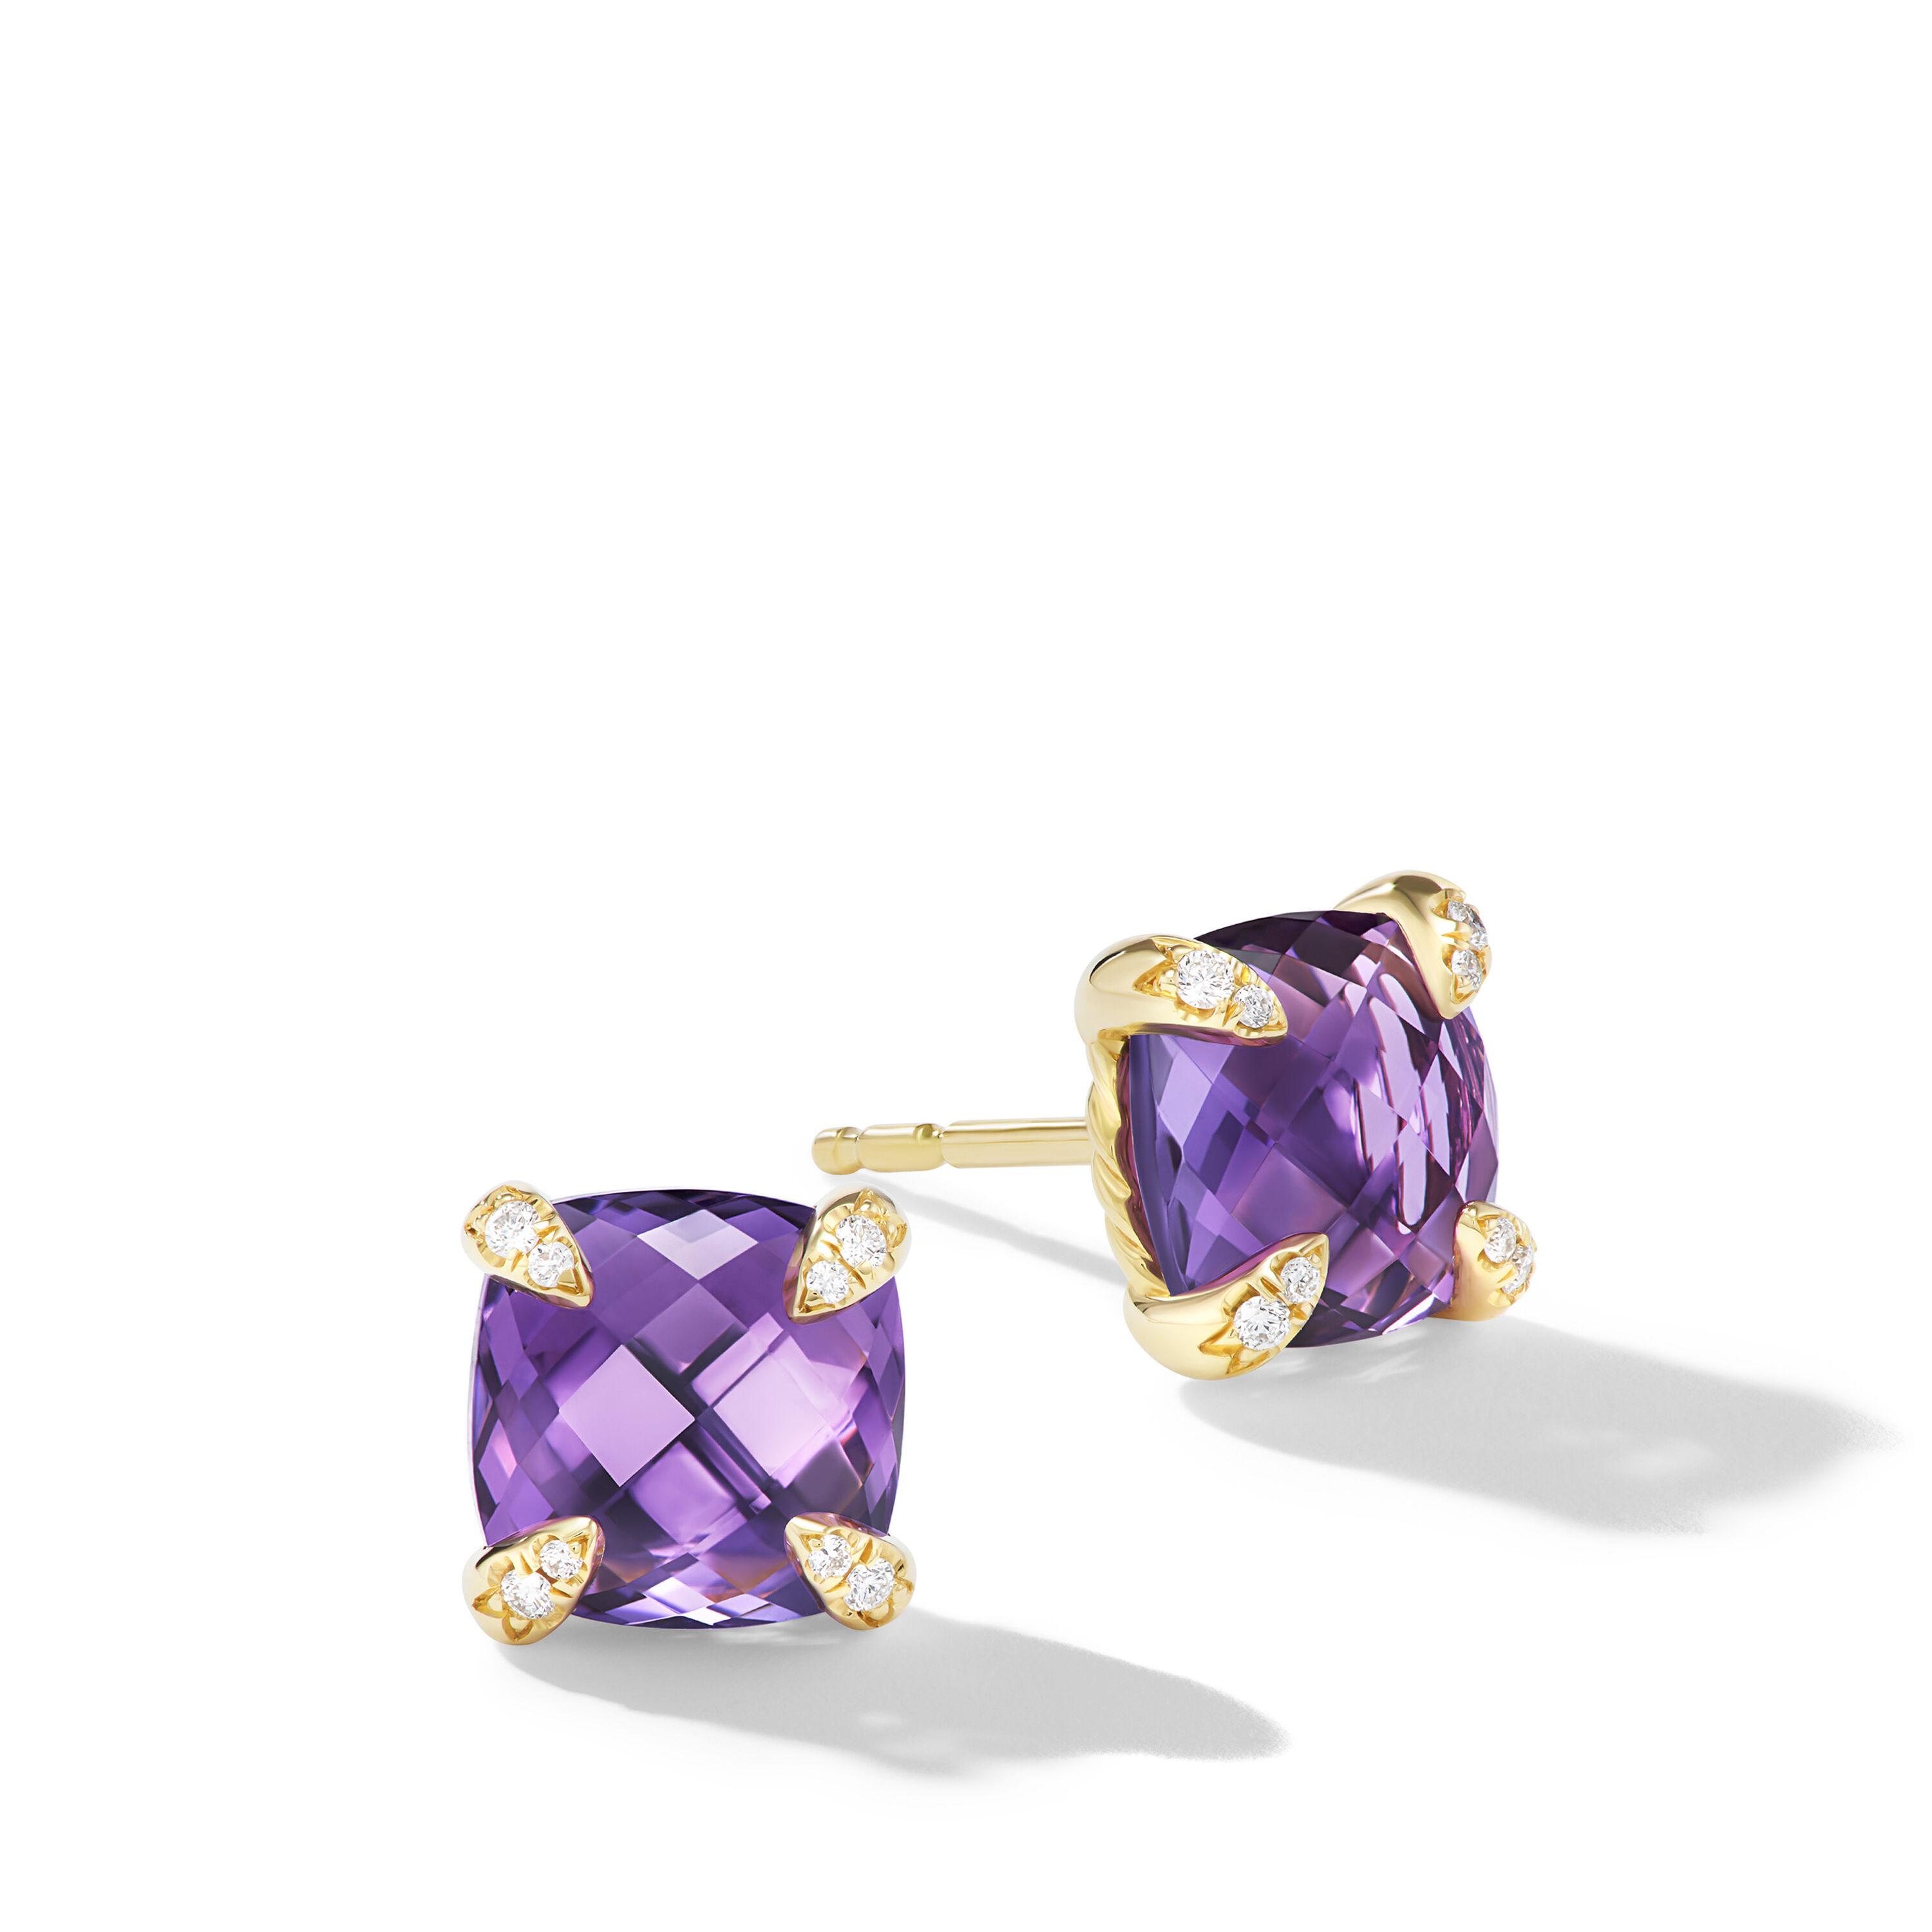 David Yurman Chatelaine Stud Earrings in 18K Yellow Gold with Amethyst and Diamonds, 8mm 0